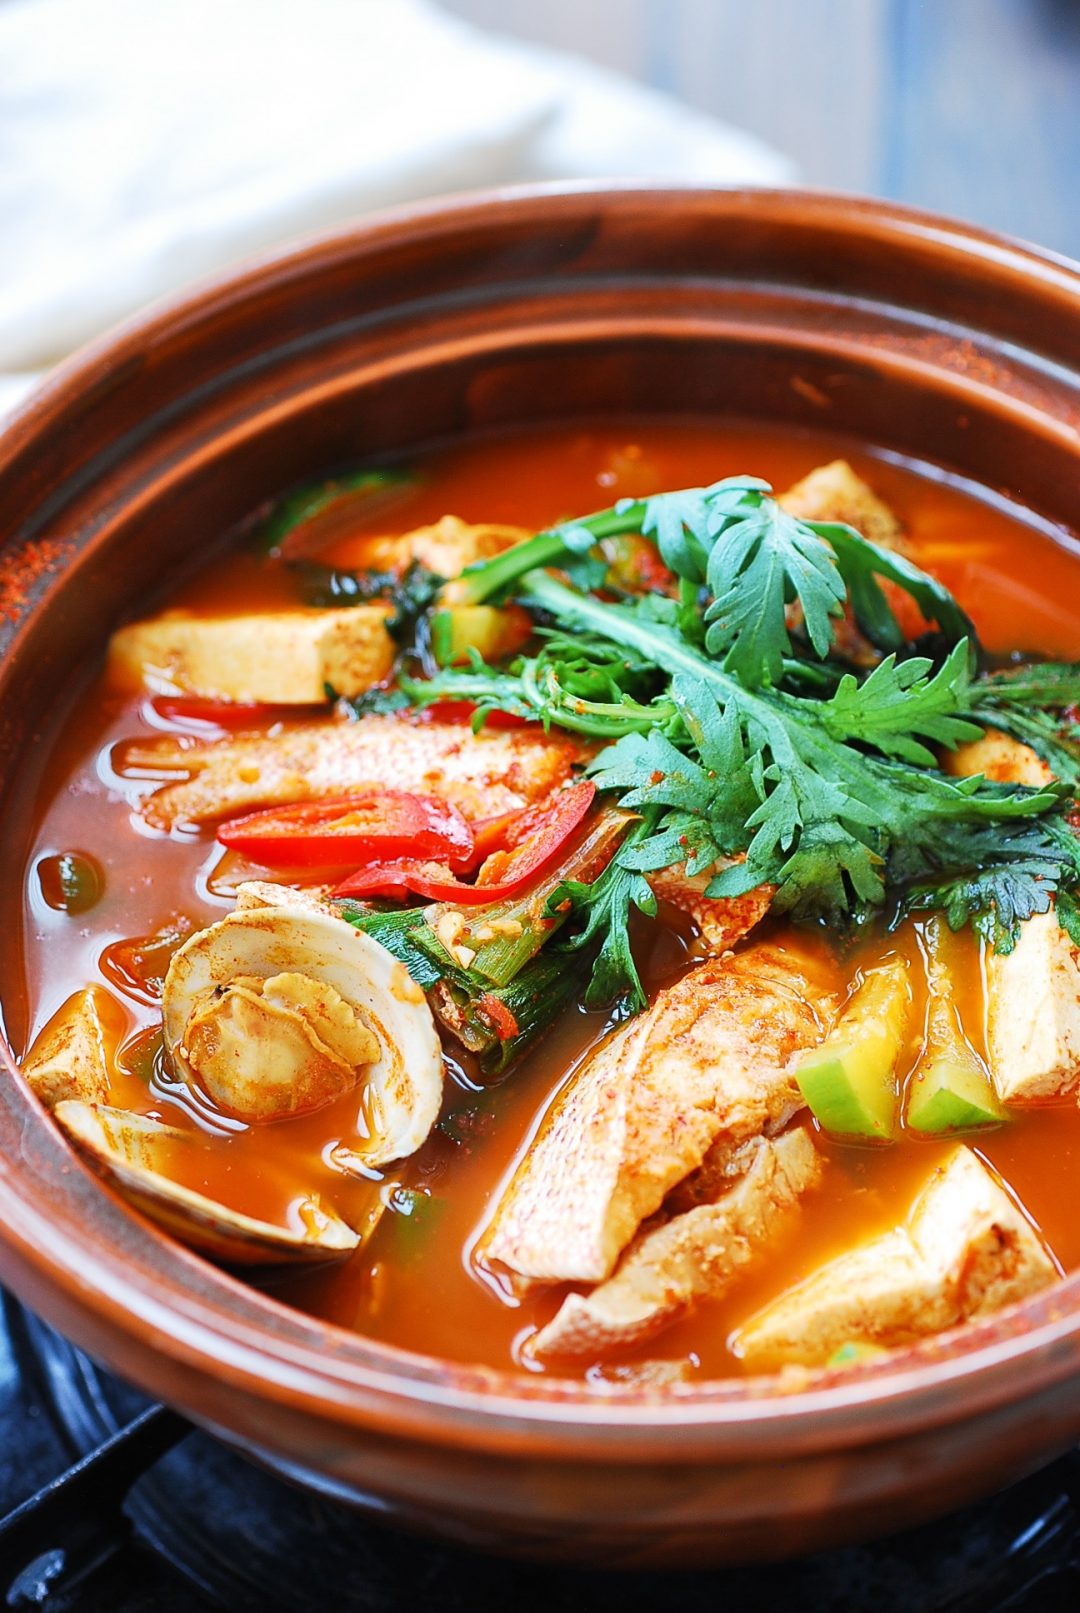 DSC 2723 1 e1613456552317 - Domi Maeuntang (Spicy Fish Stew with Red Snapper)